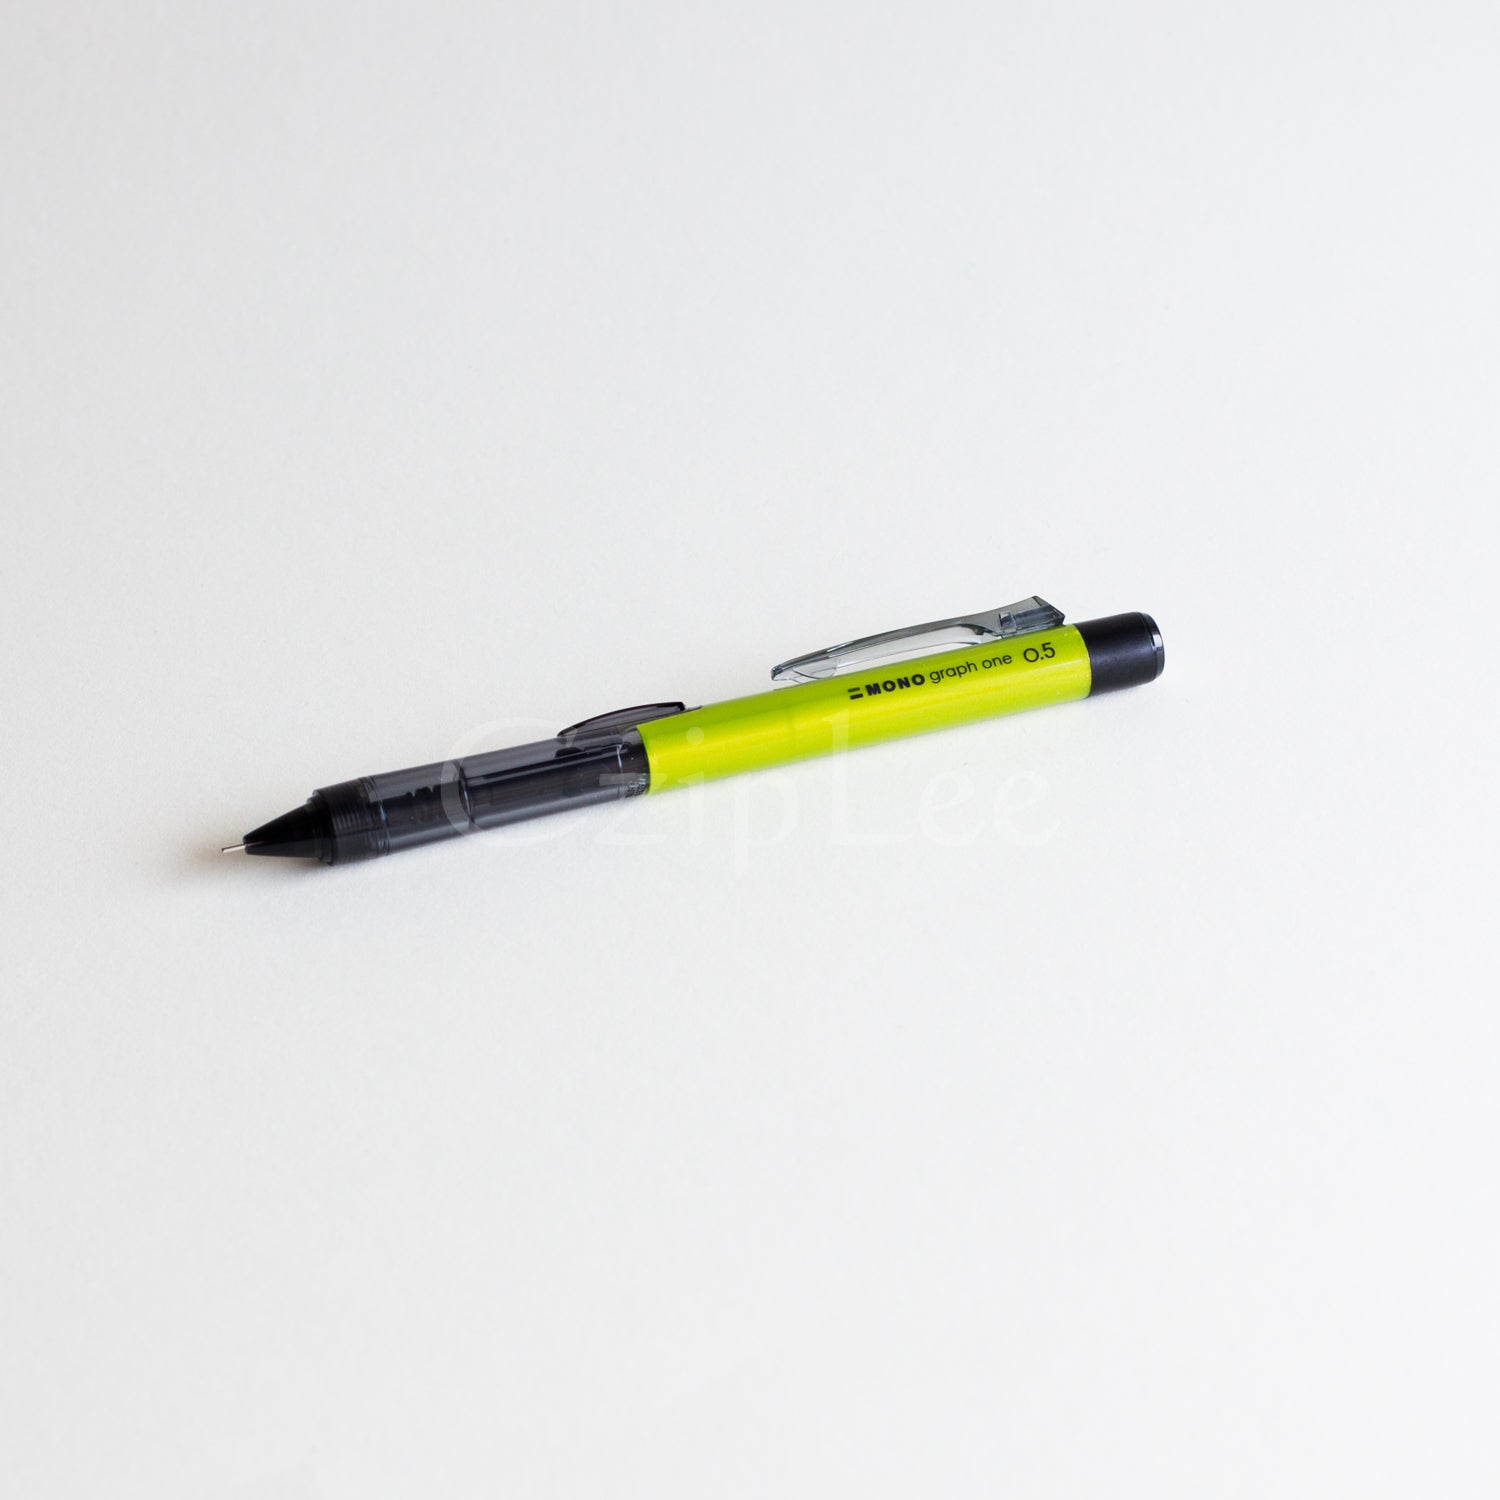 TOMBOW Monograph One 0.5mm-Lime